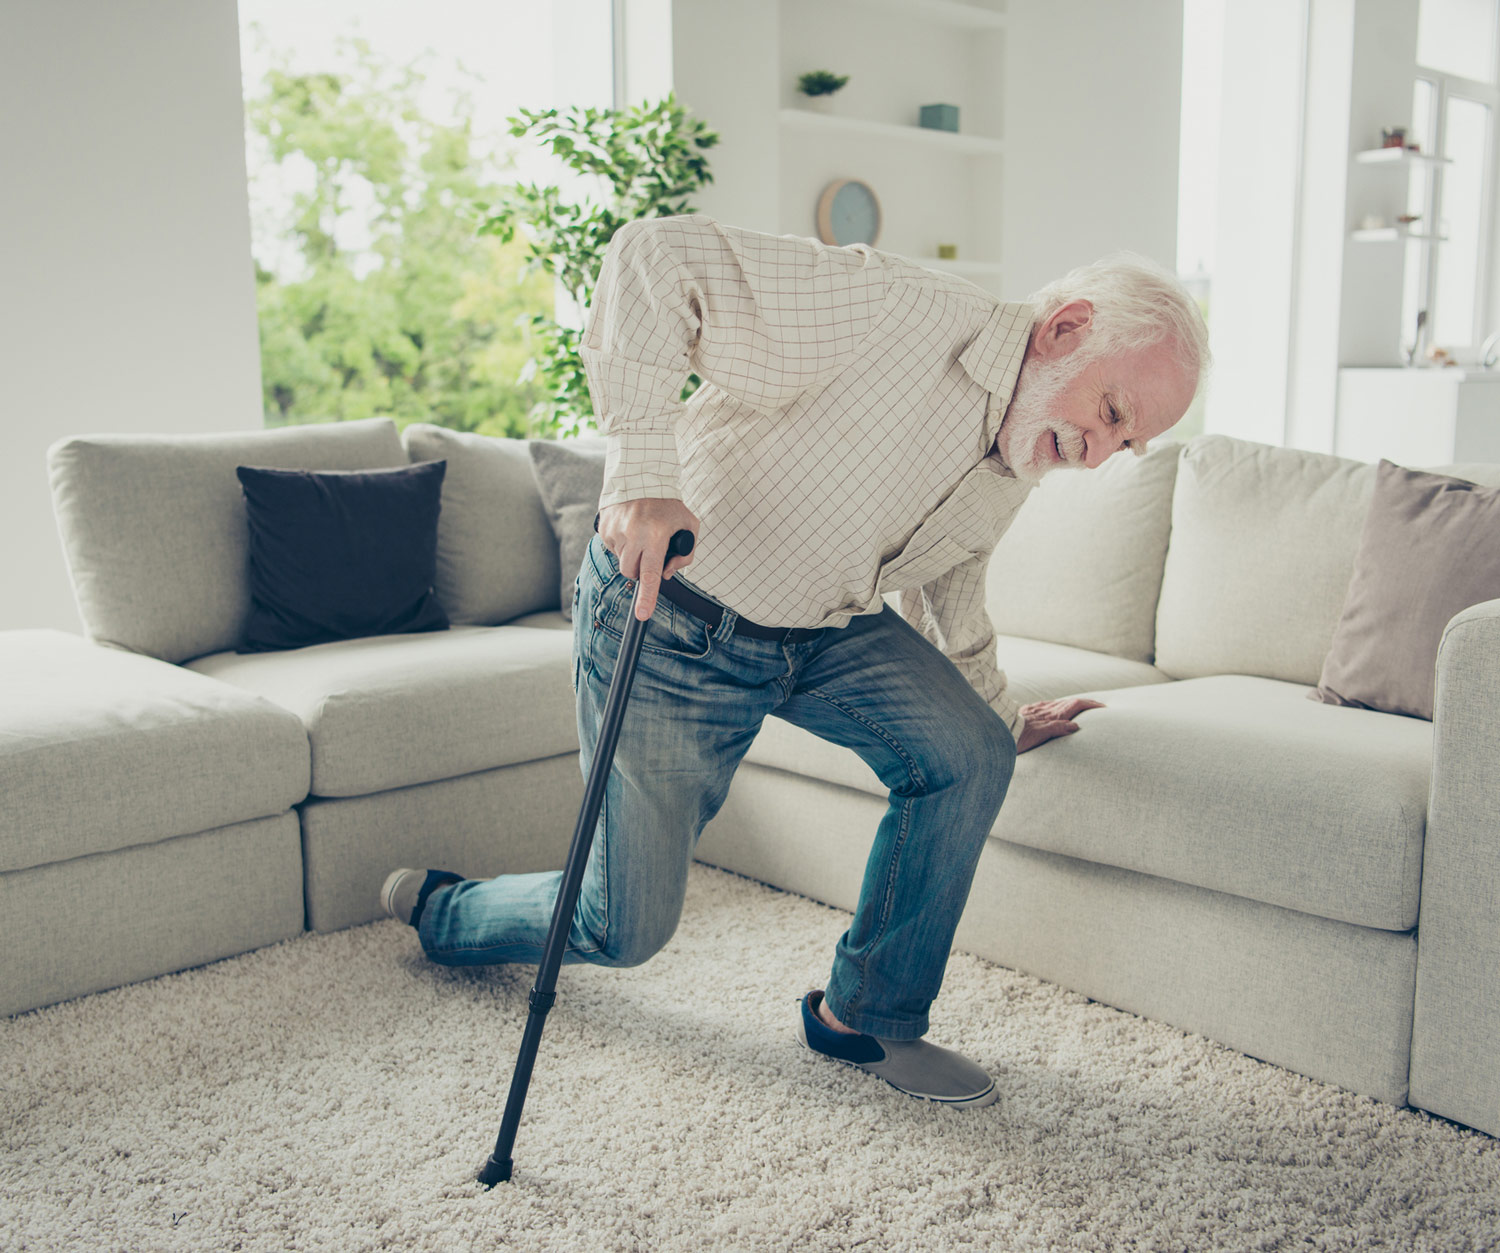 Study Shows Increased Risk of Falls in Knee OA